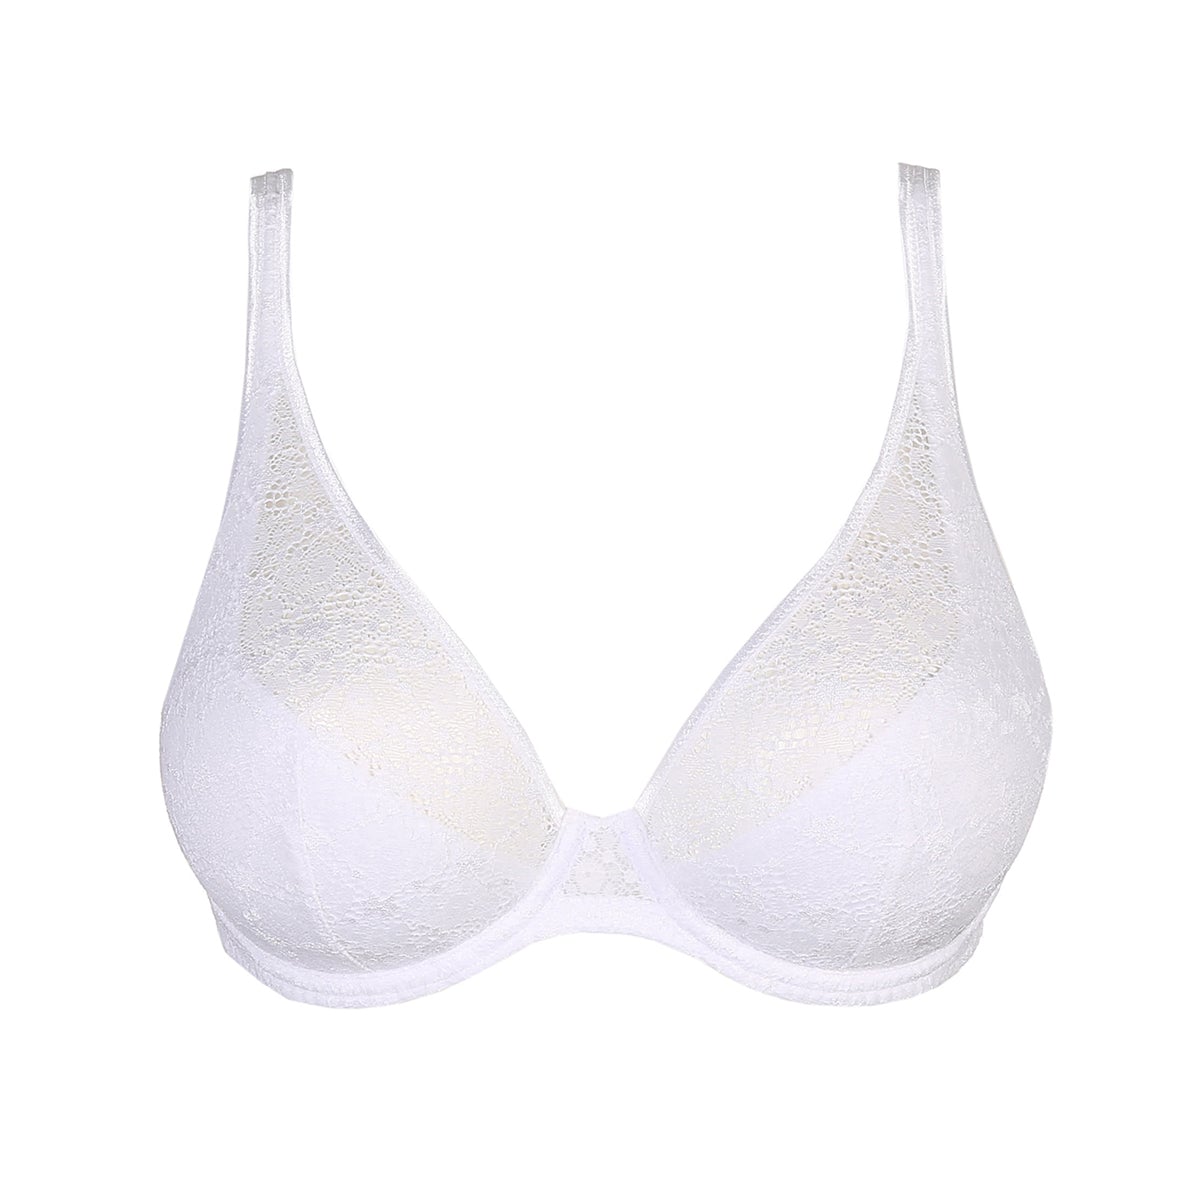 Currans of Kerrisdale - Our favourite deep plunge bra, Epirus by